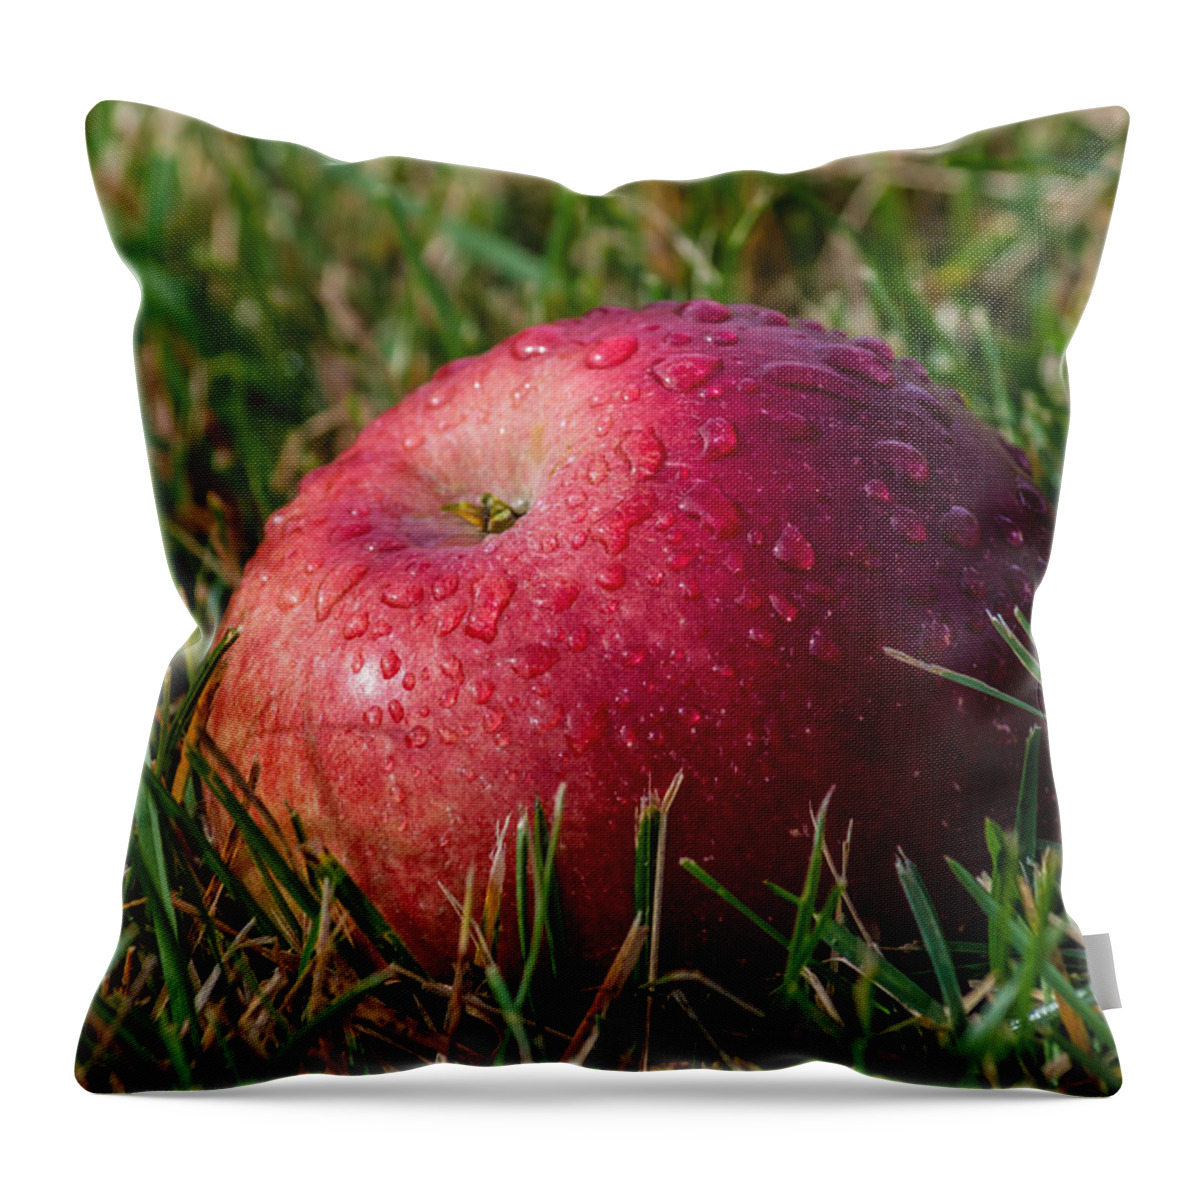 New York Throw Pillow featuring the photograph Fallen Apple by Ray Sheley